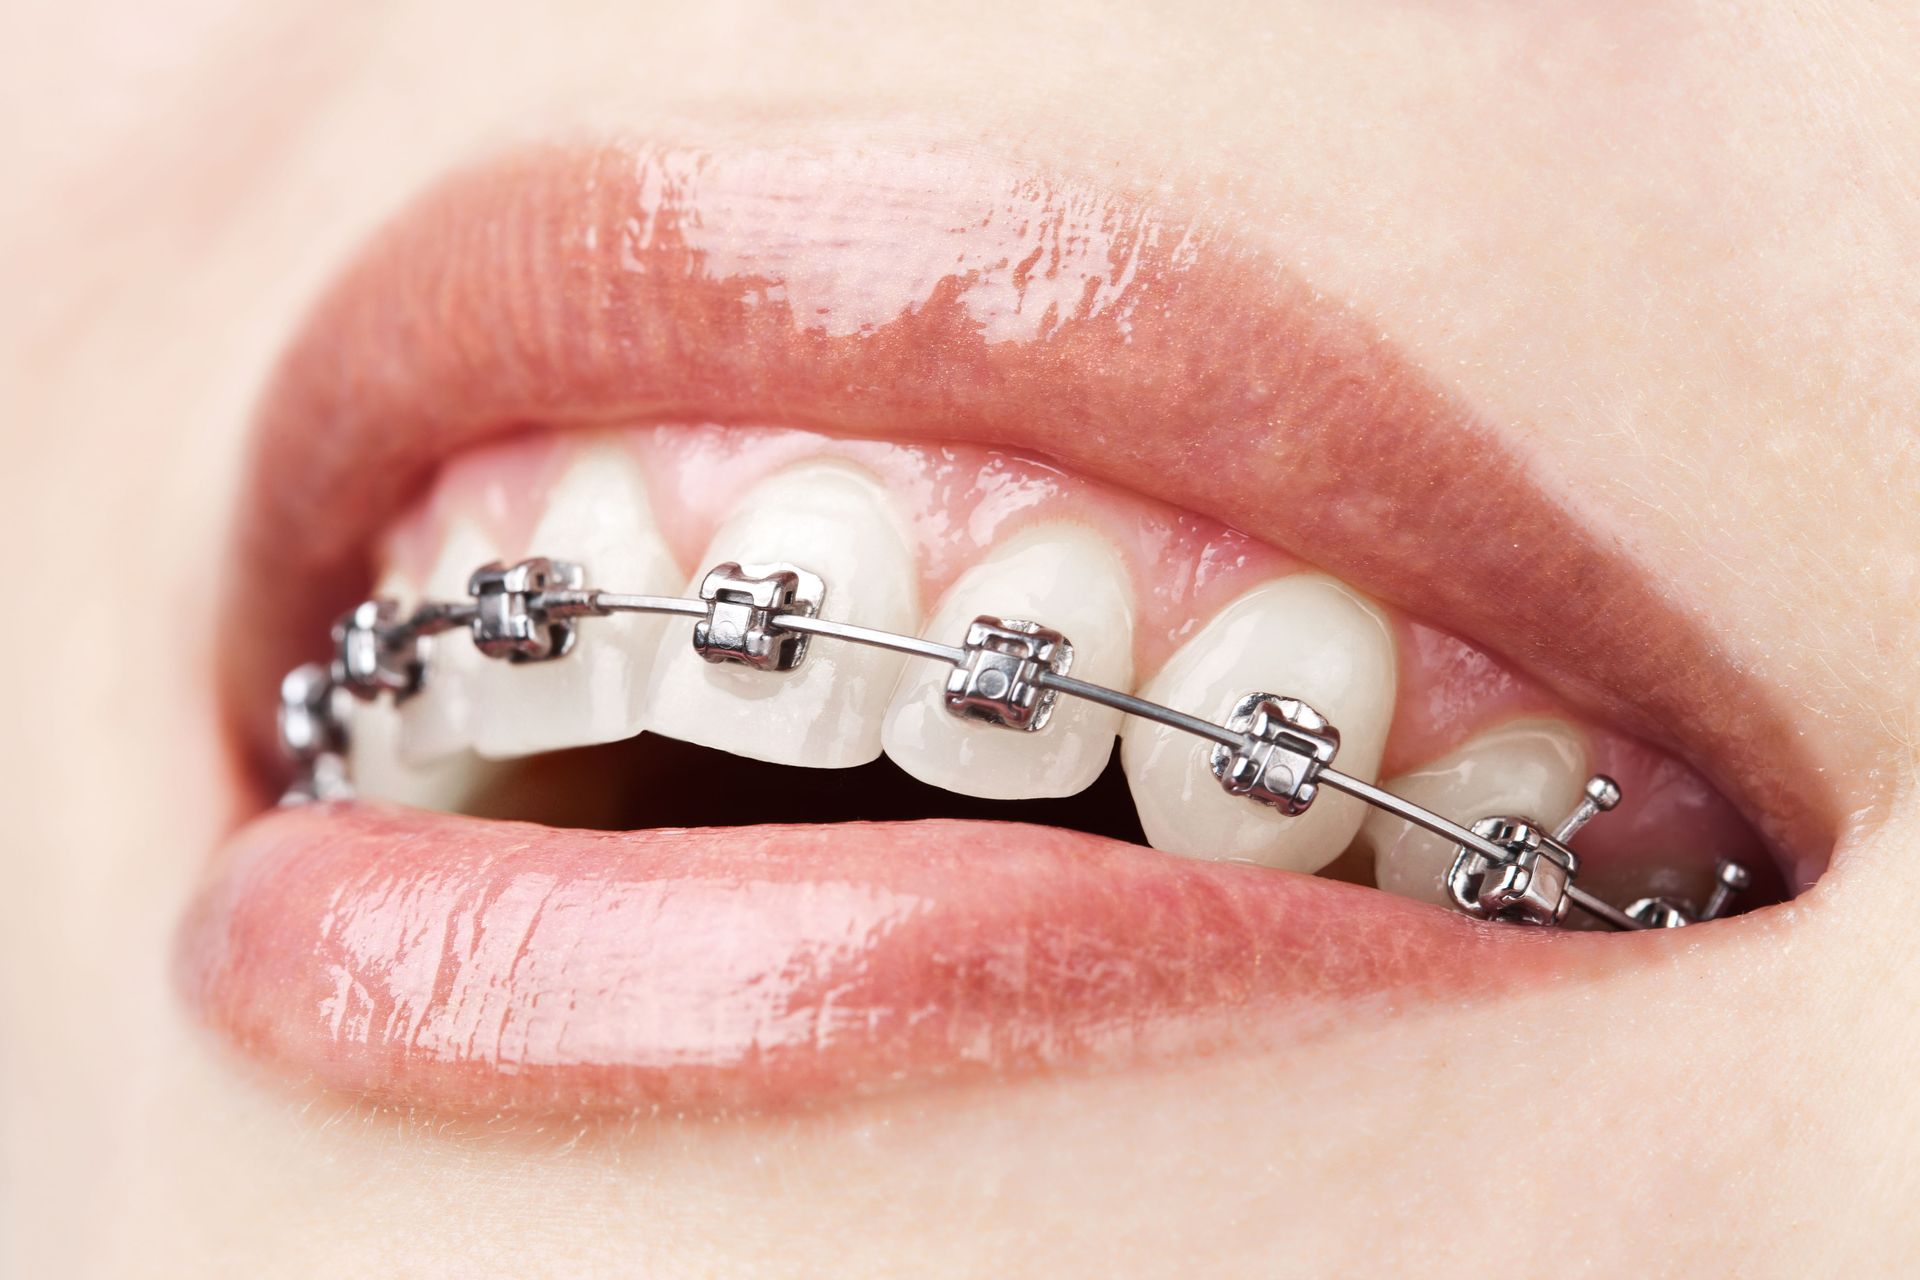 cosmetic dentistry services